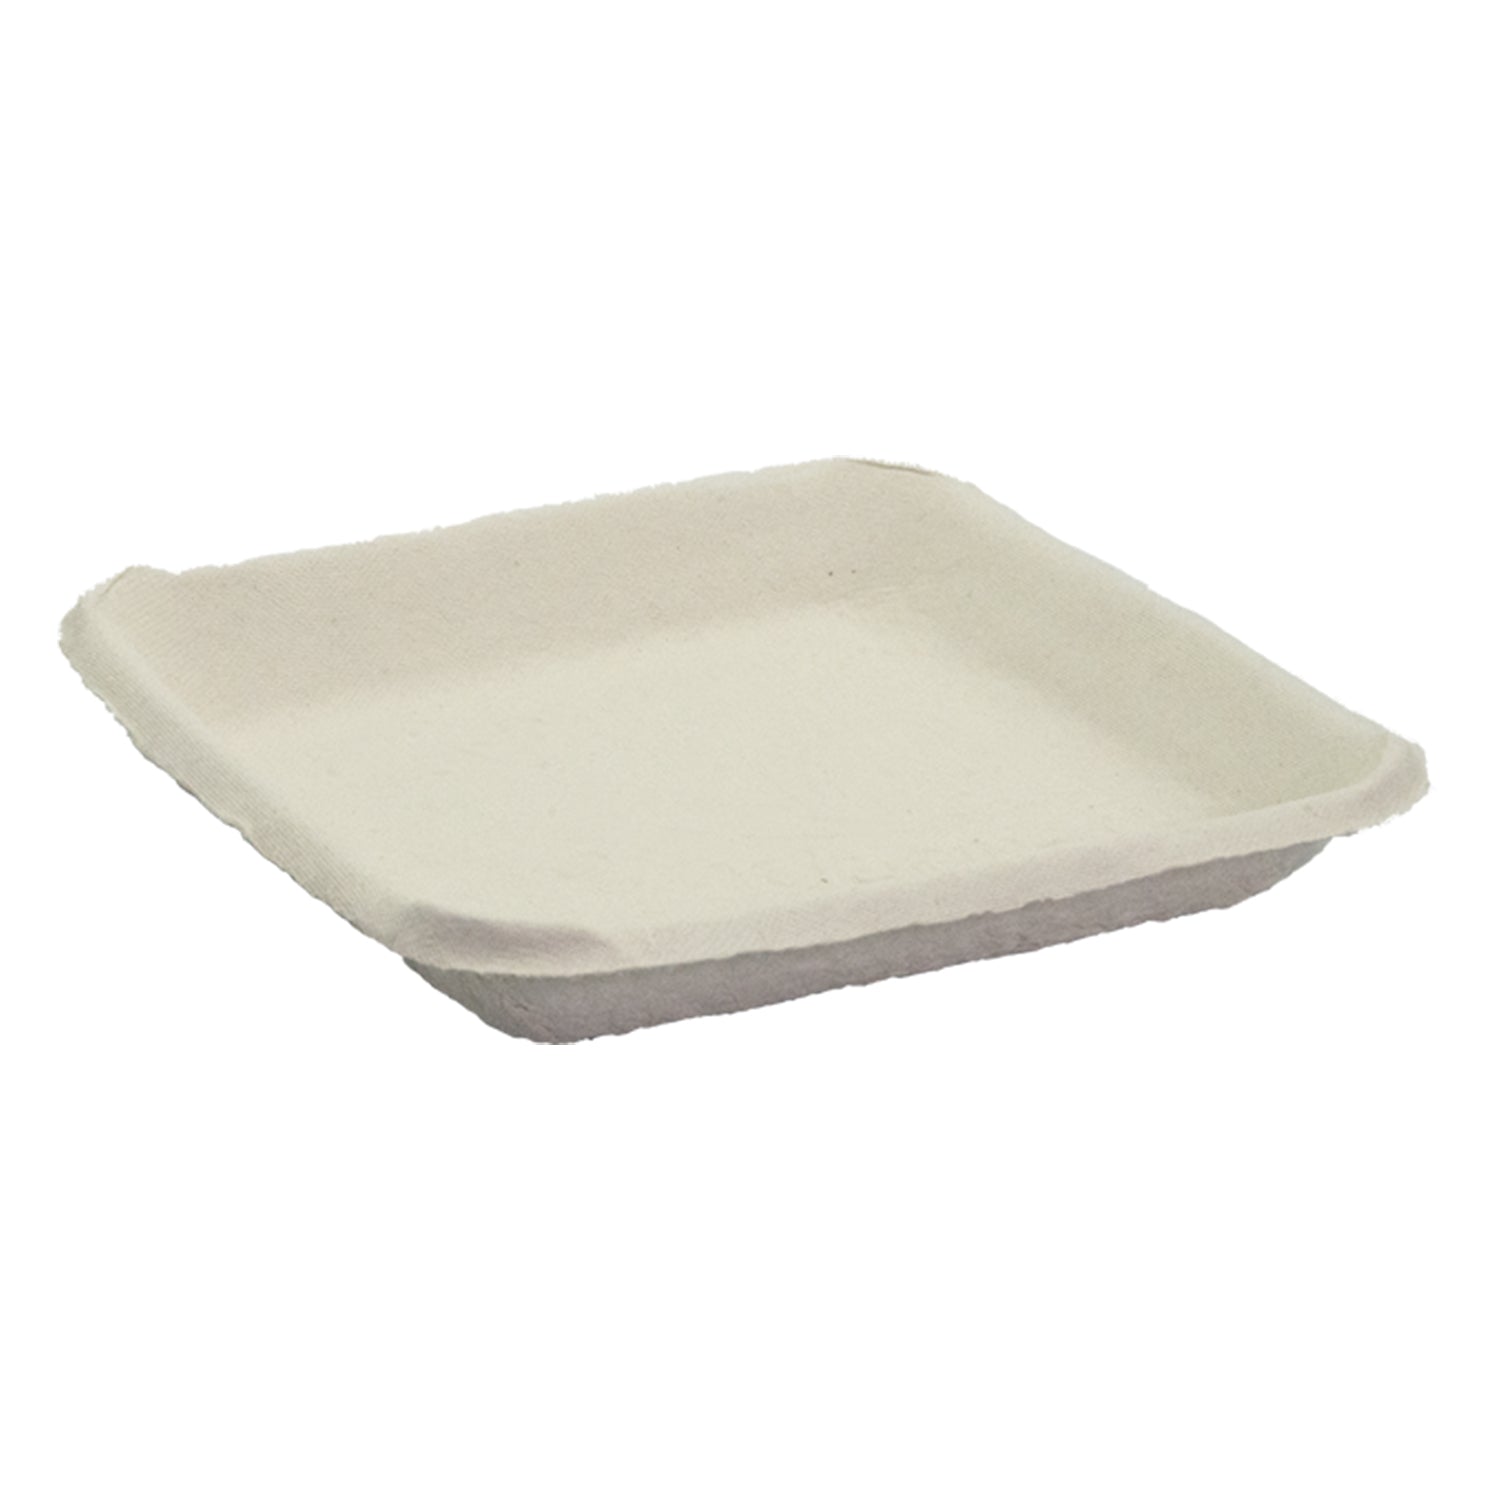 Omnipak Pulp Tray |  Pulp 75 | Pack of 75 (2)